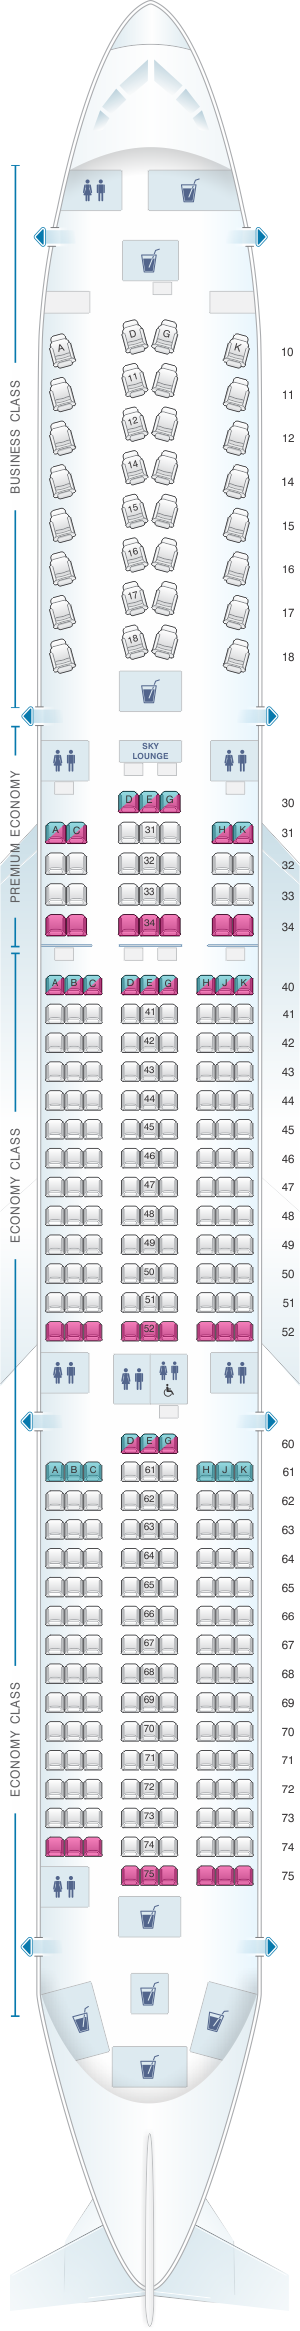 Seat map for China Airlines Airbus A350 900